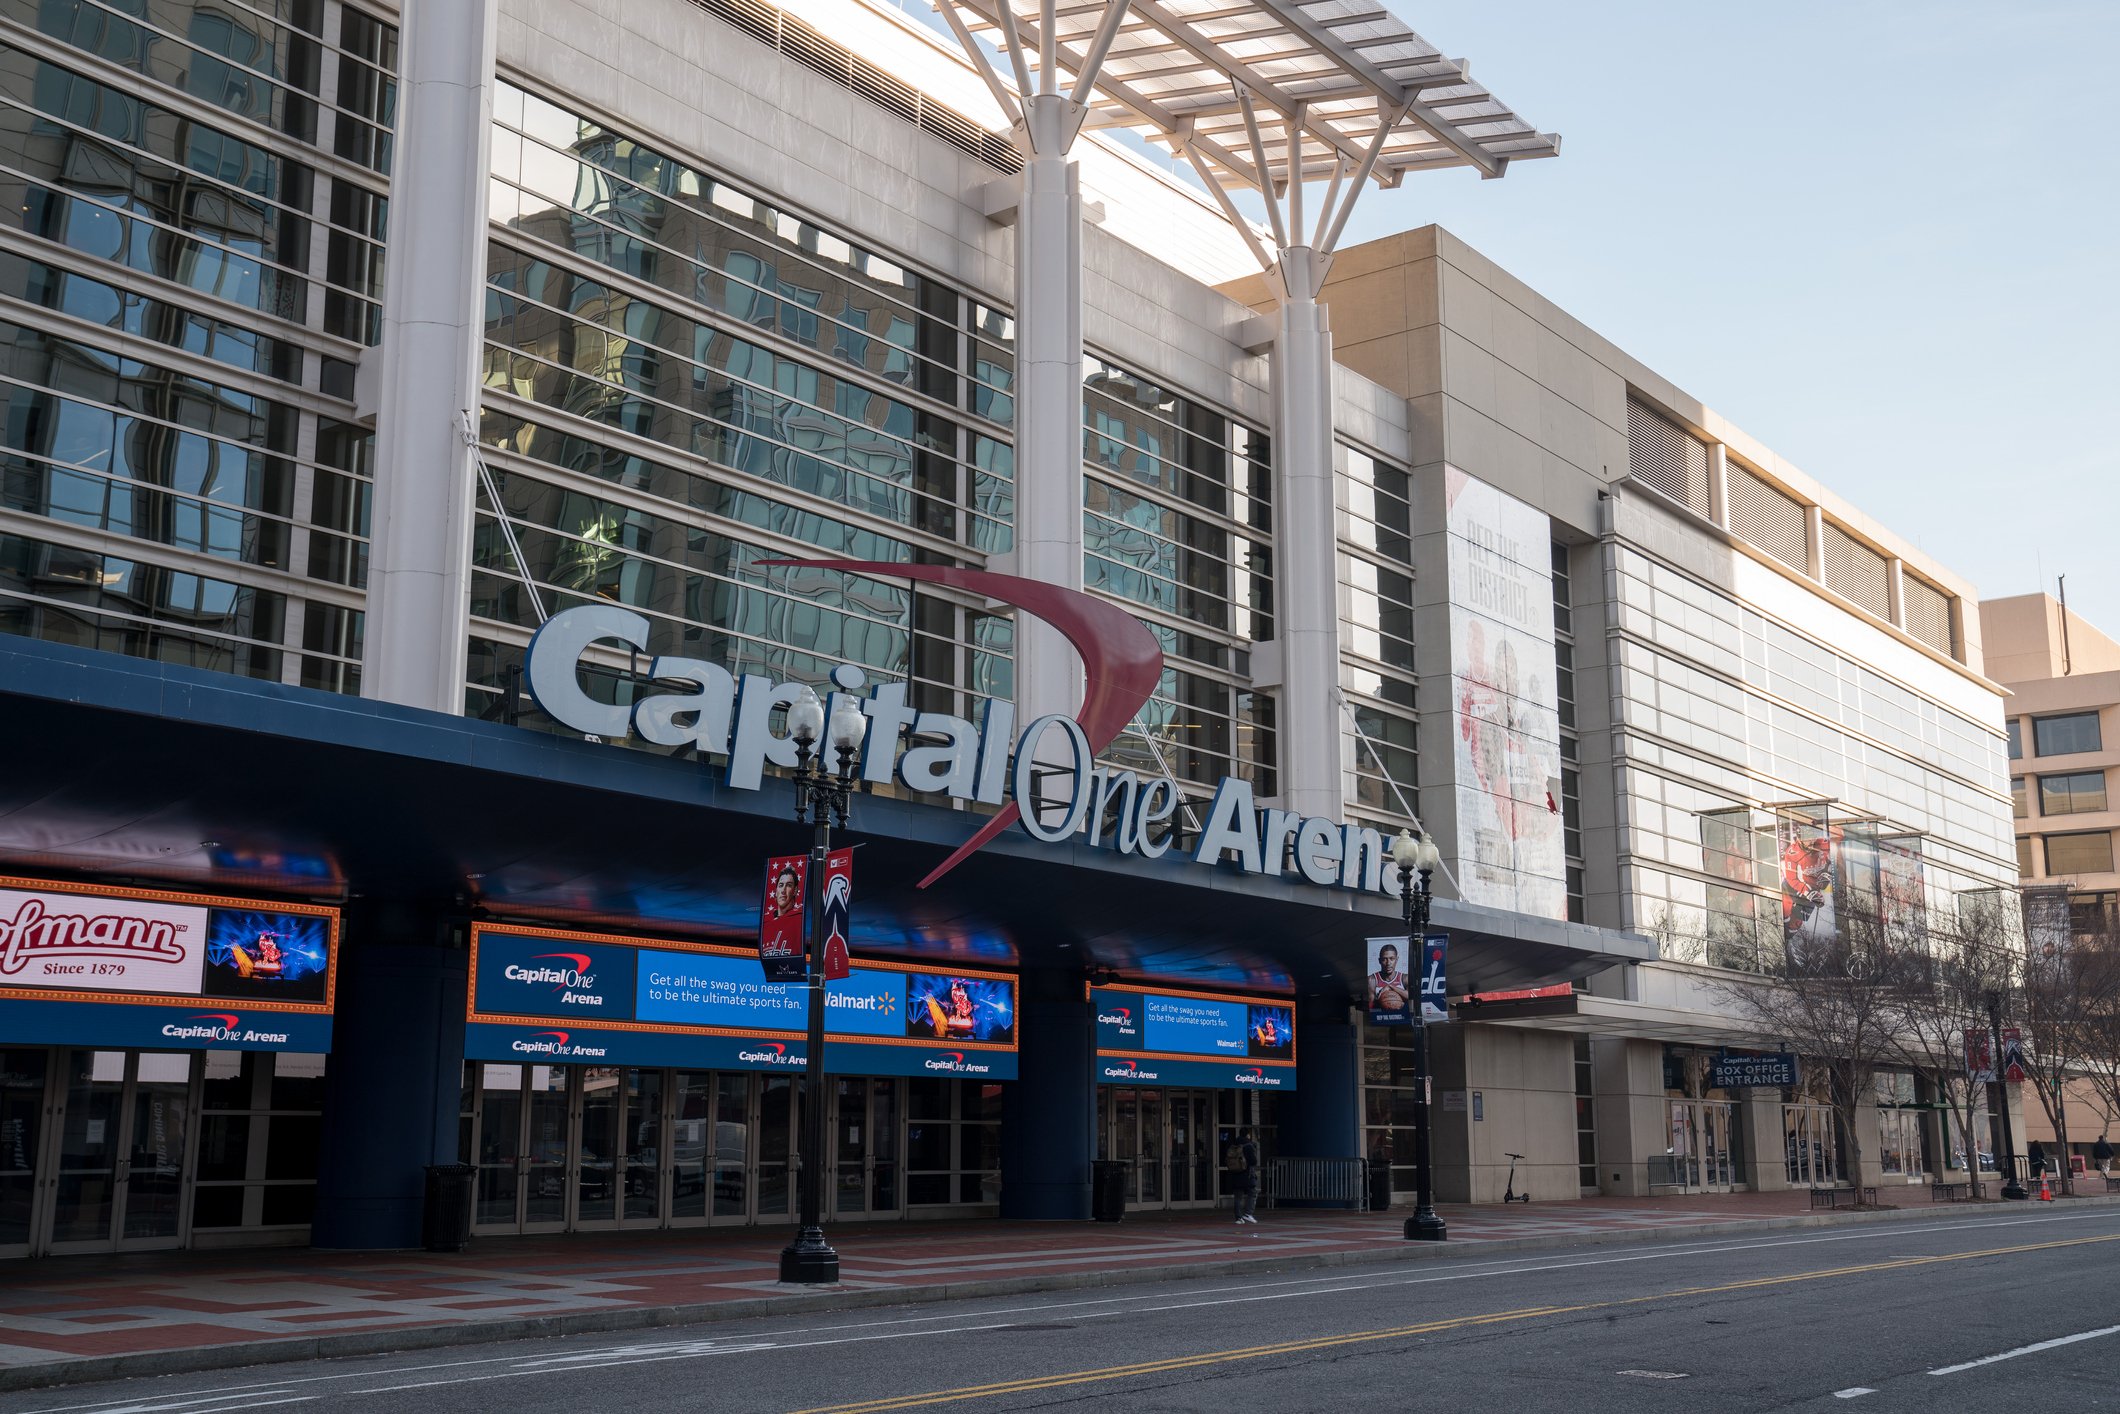 Capital One Arena in Washington D.C.